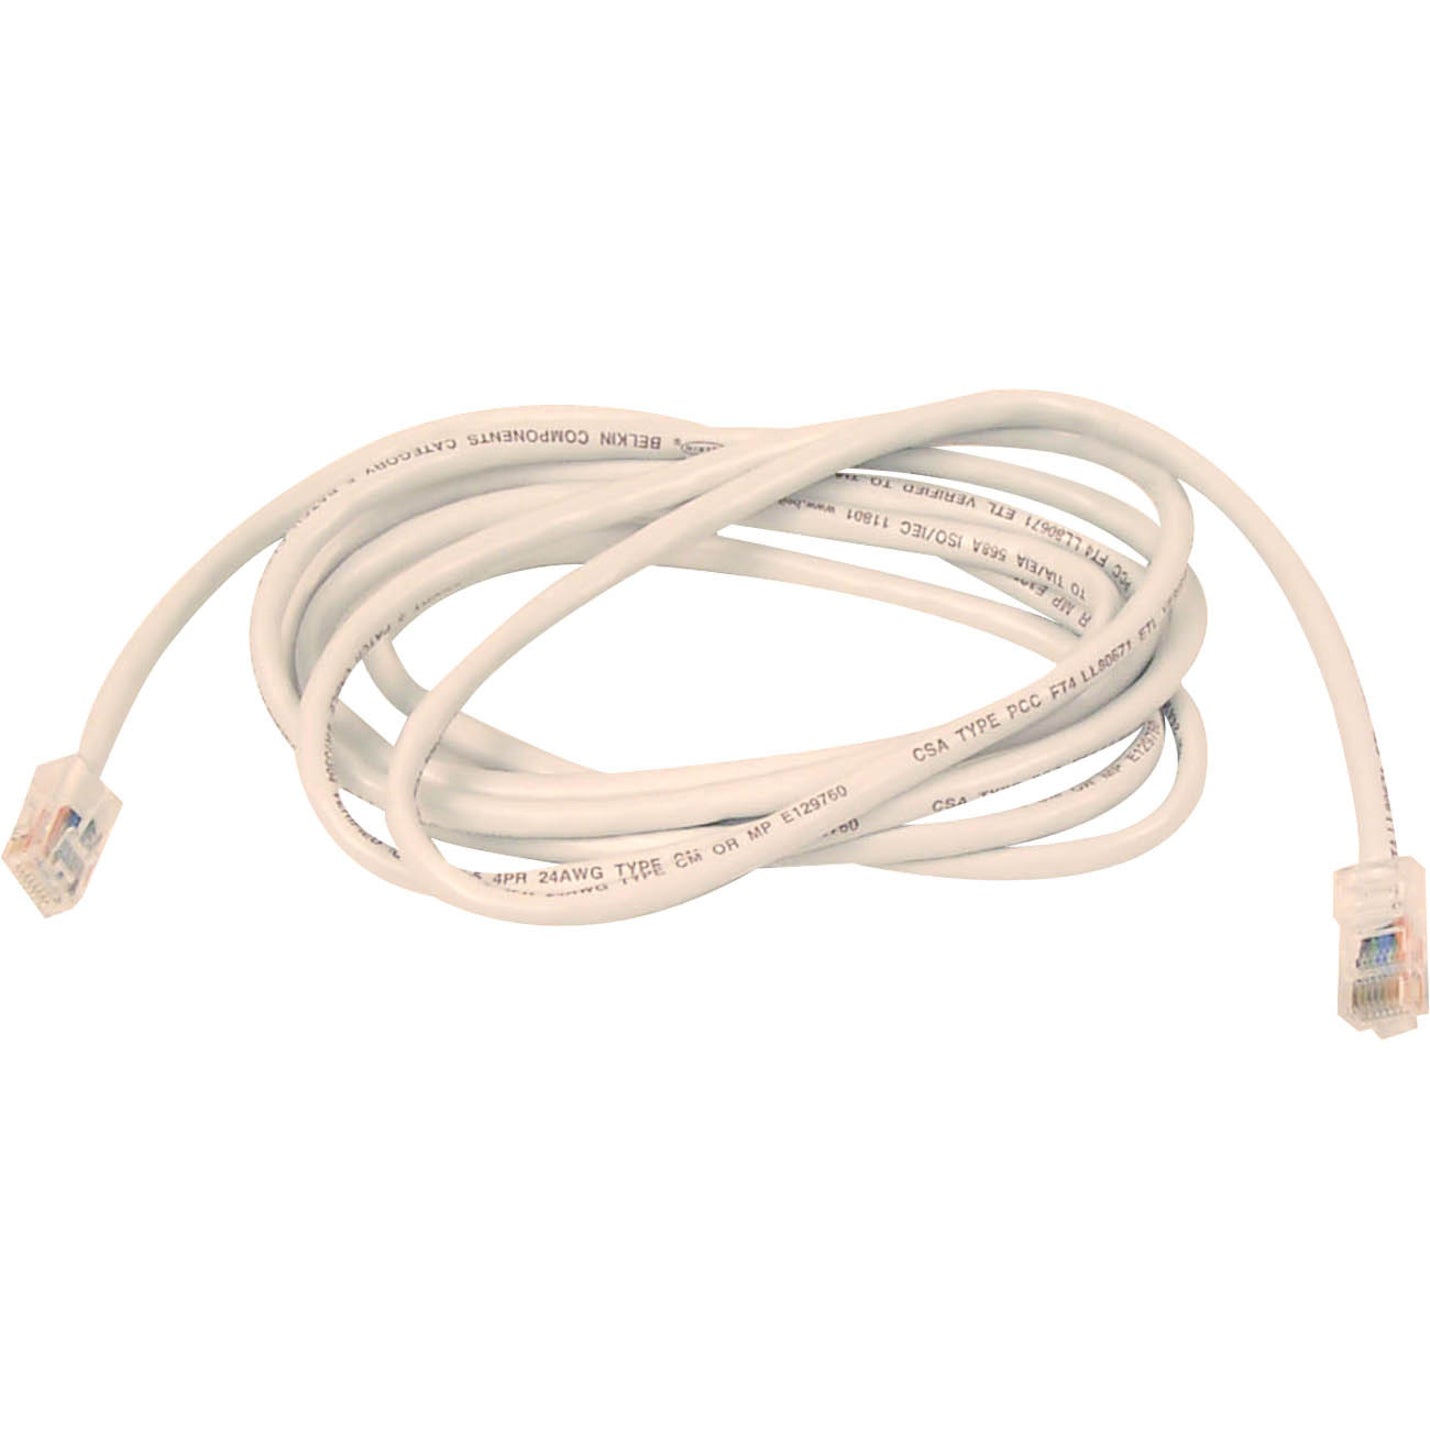 Belkin A3L791-14-WHT Cat5e Patch Cable, 14 ft, PowerSum Tested, EIA/TIA-568 Certified